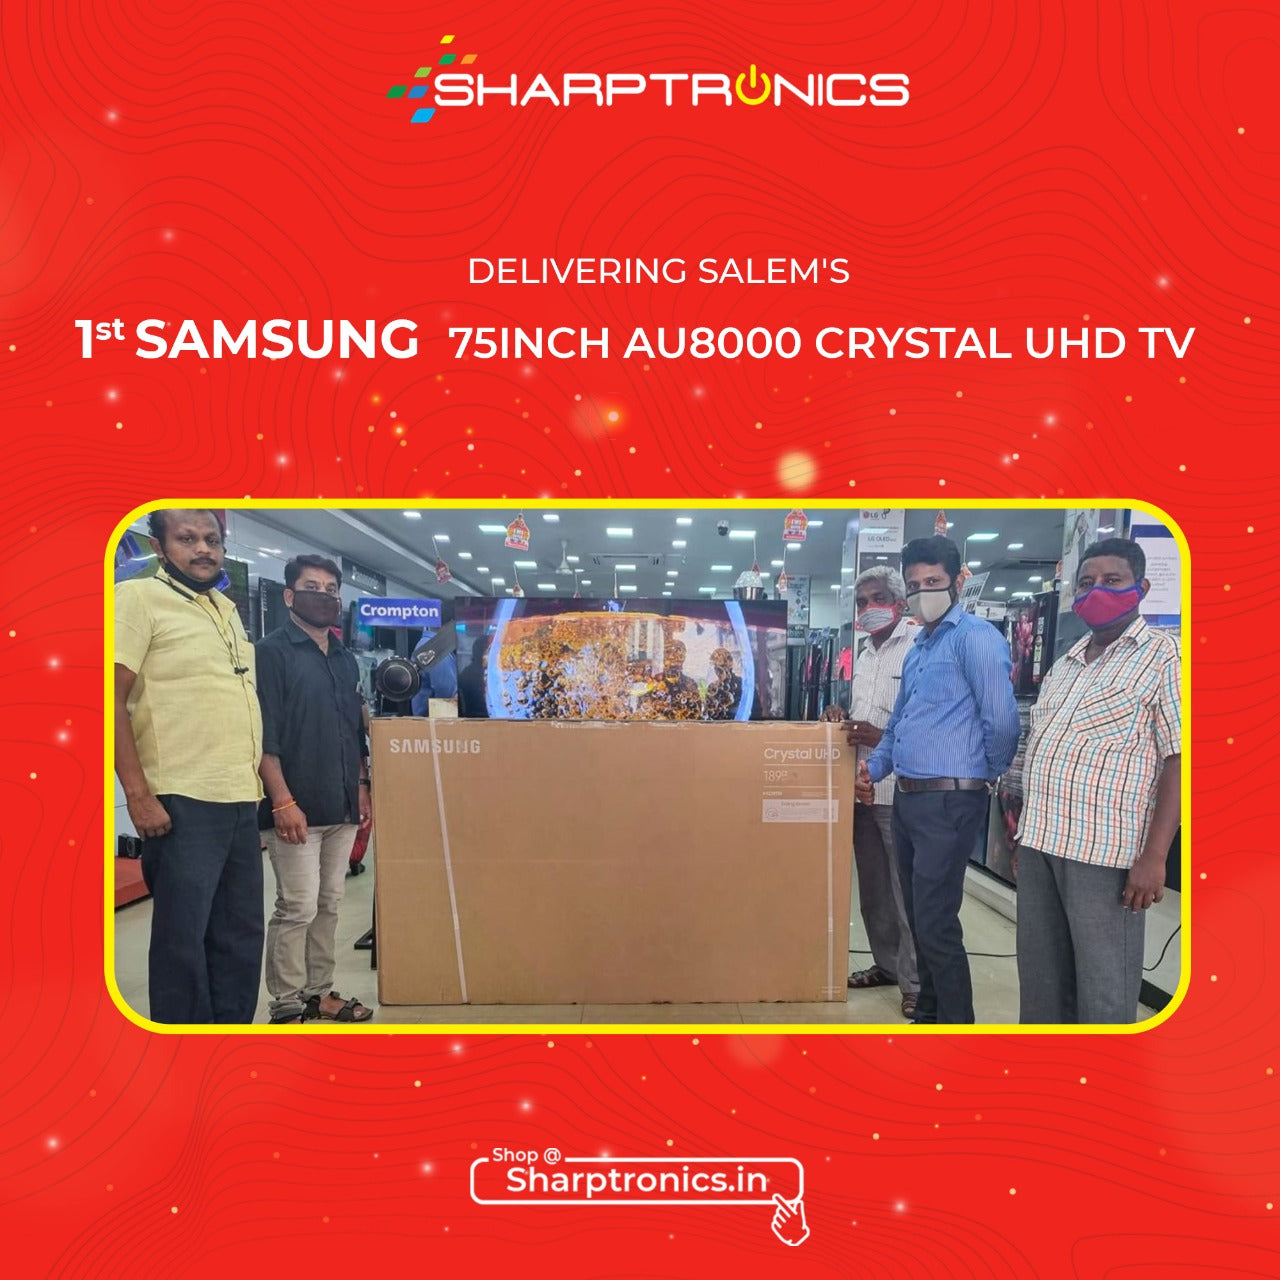 Sharptronics is Happy to Deliver Samsung 75 Inch Crystal UHD TV